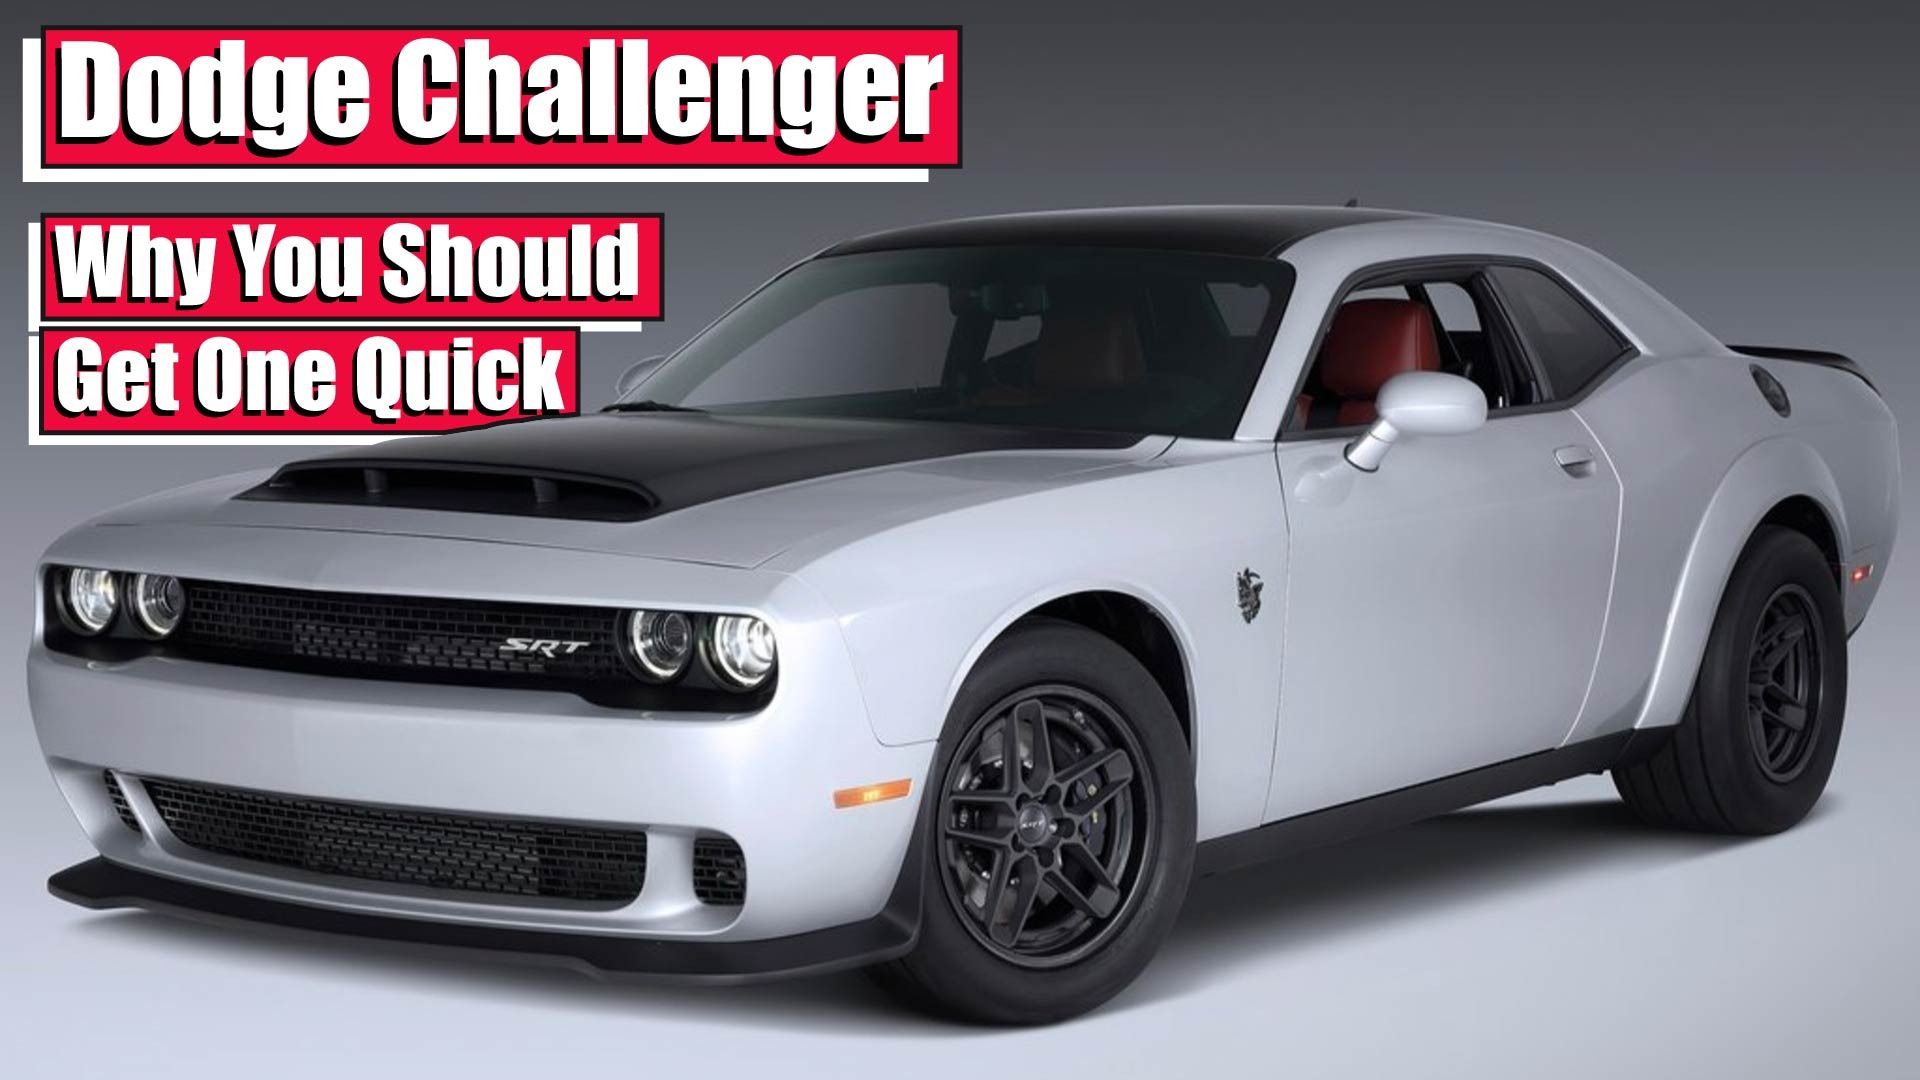 Dodge Challenger Featured Image